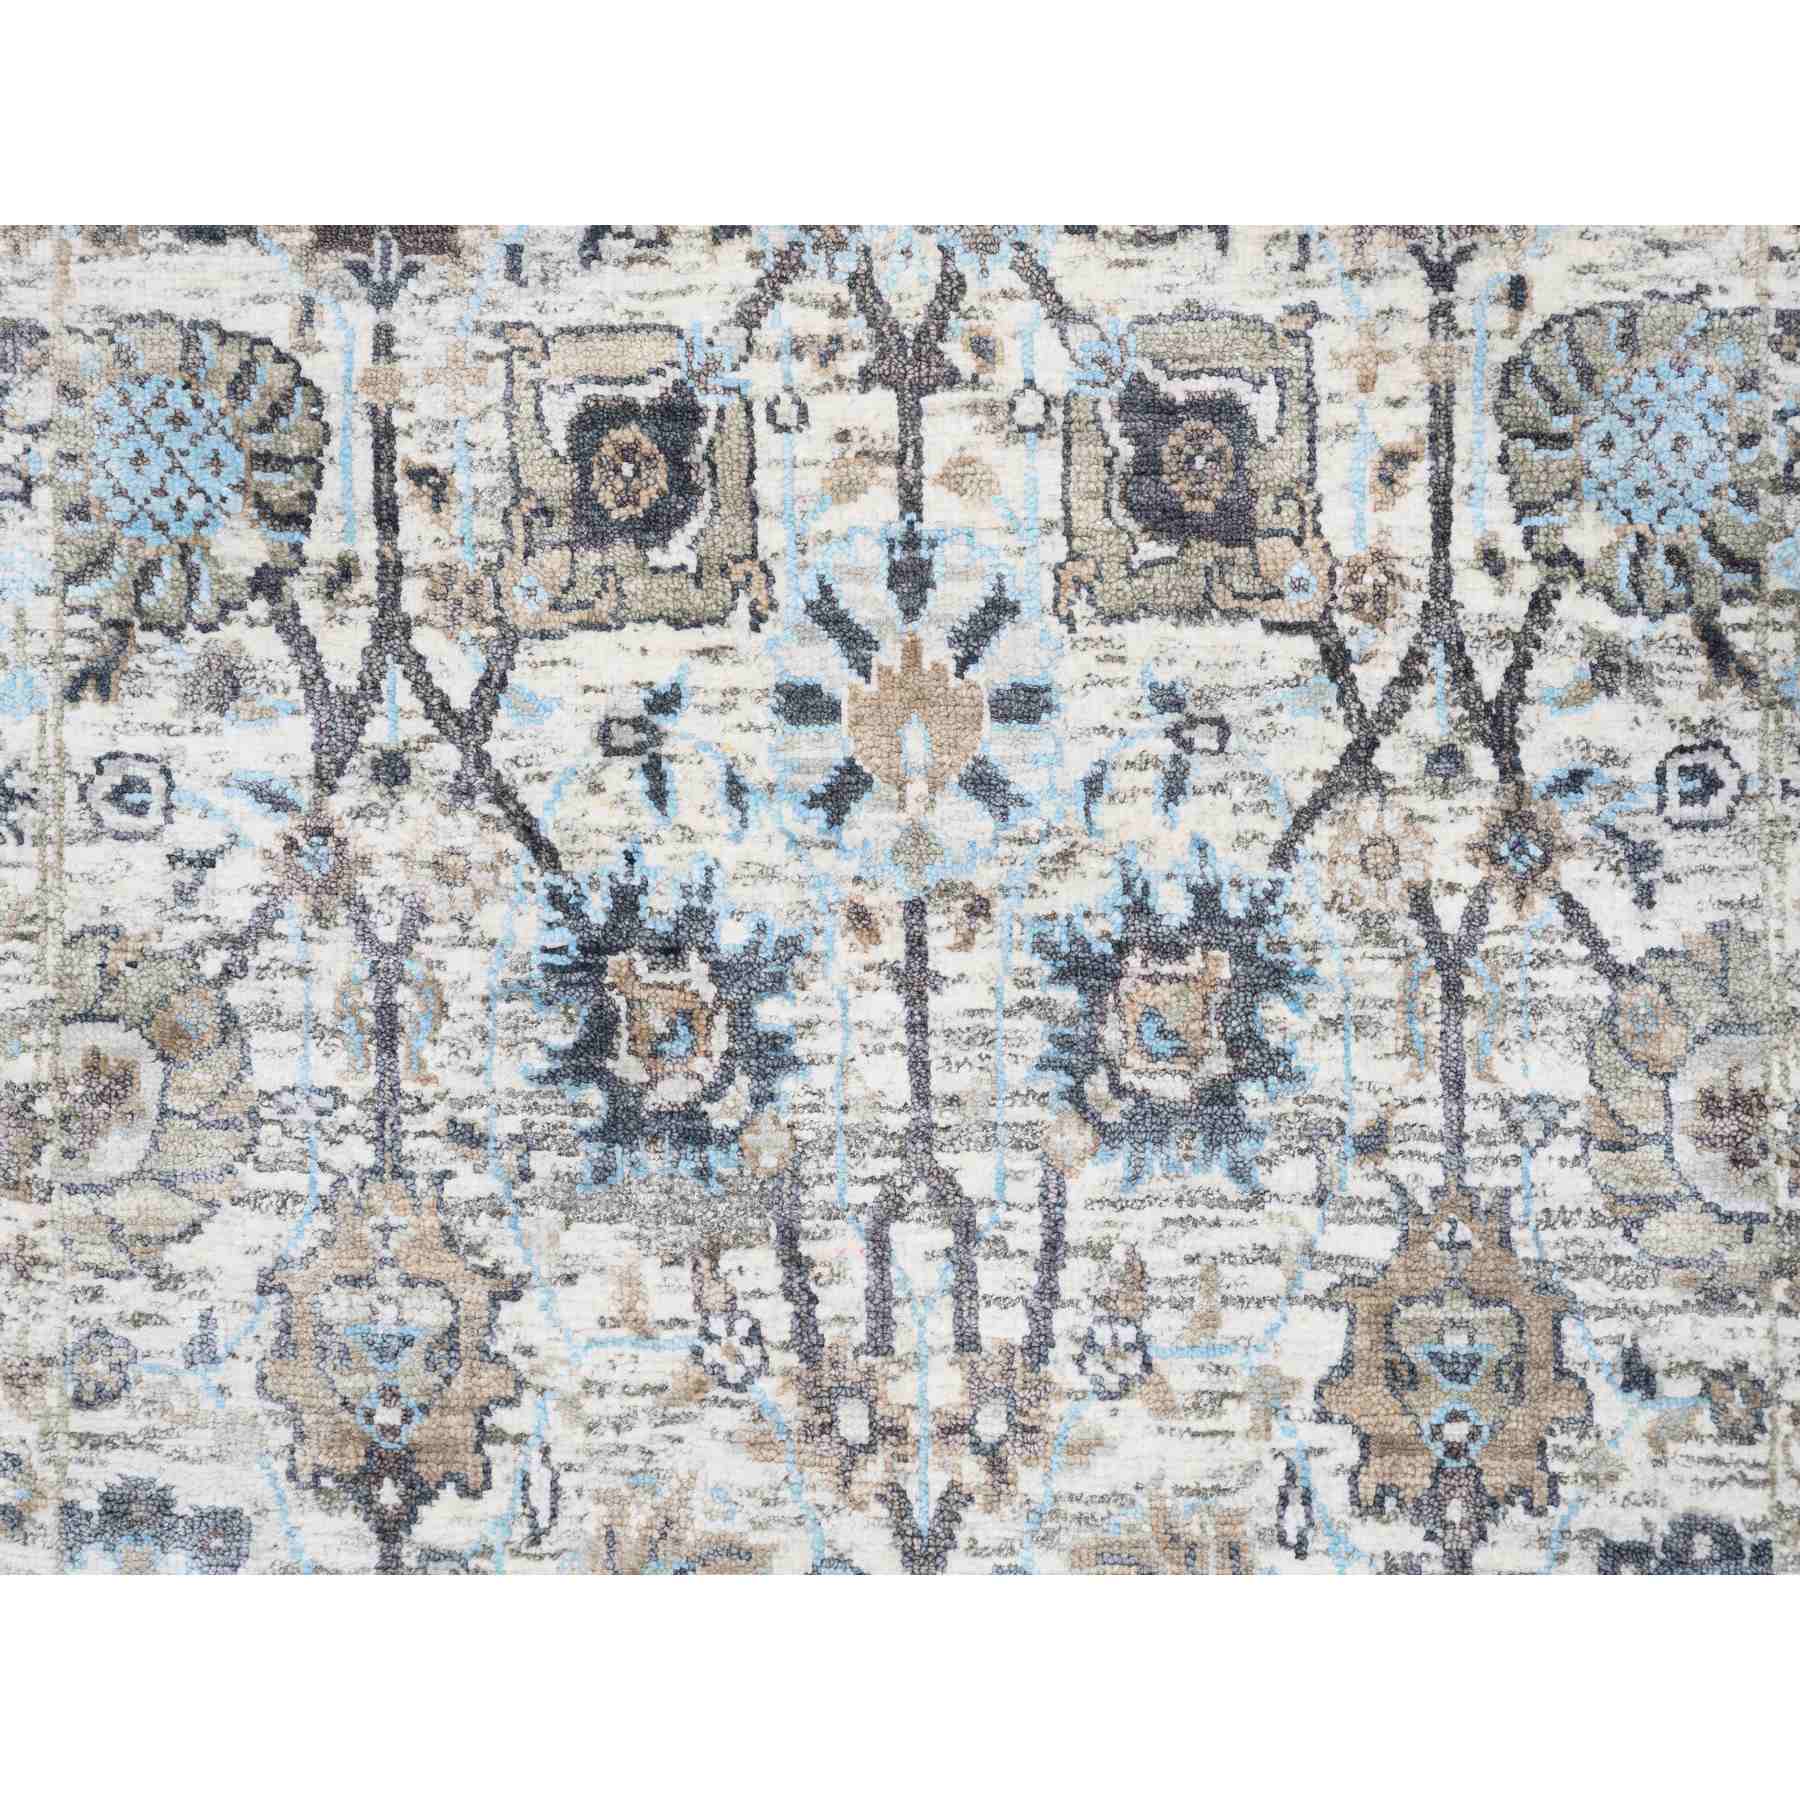 Transitional-Hand-Knotted-Rug-311455